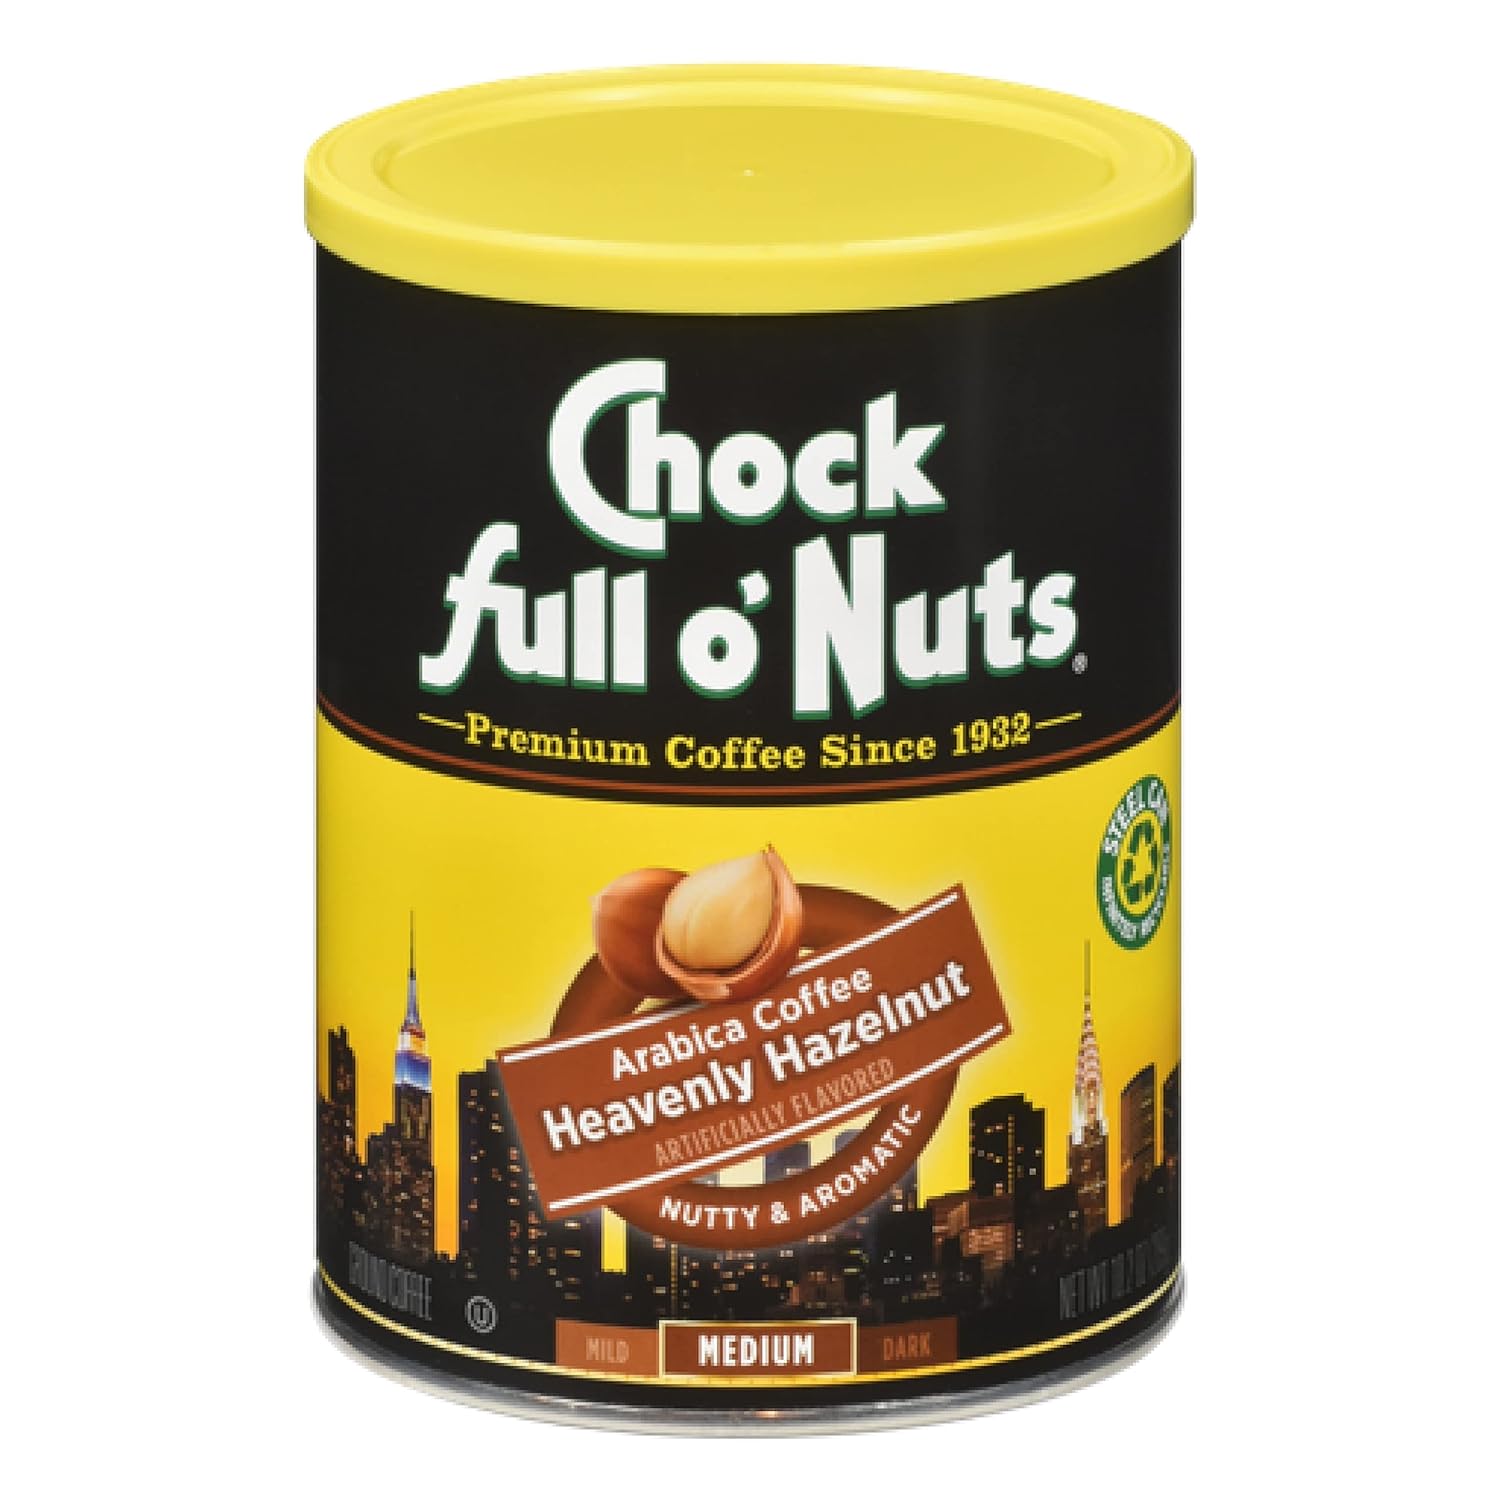 Chock Full o’Nuts Heavenly Hazelnut Ground Coffee (10.2 Oz. Can) – Arabica Coffee Beans – Aromatic and Smooth with a Rich, Nutty Flavor